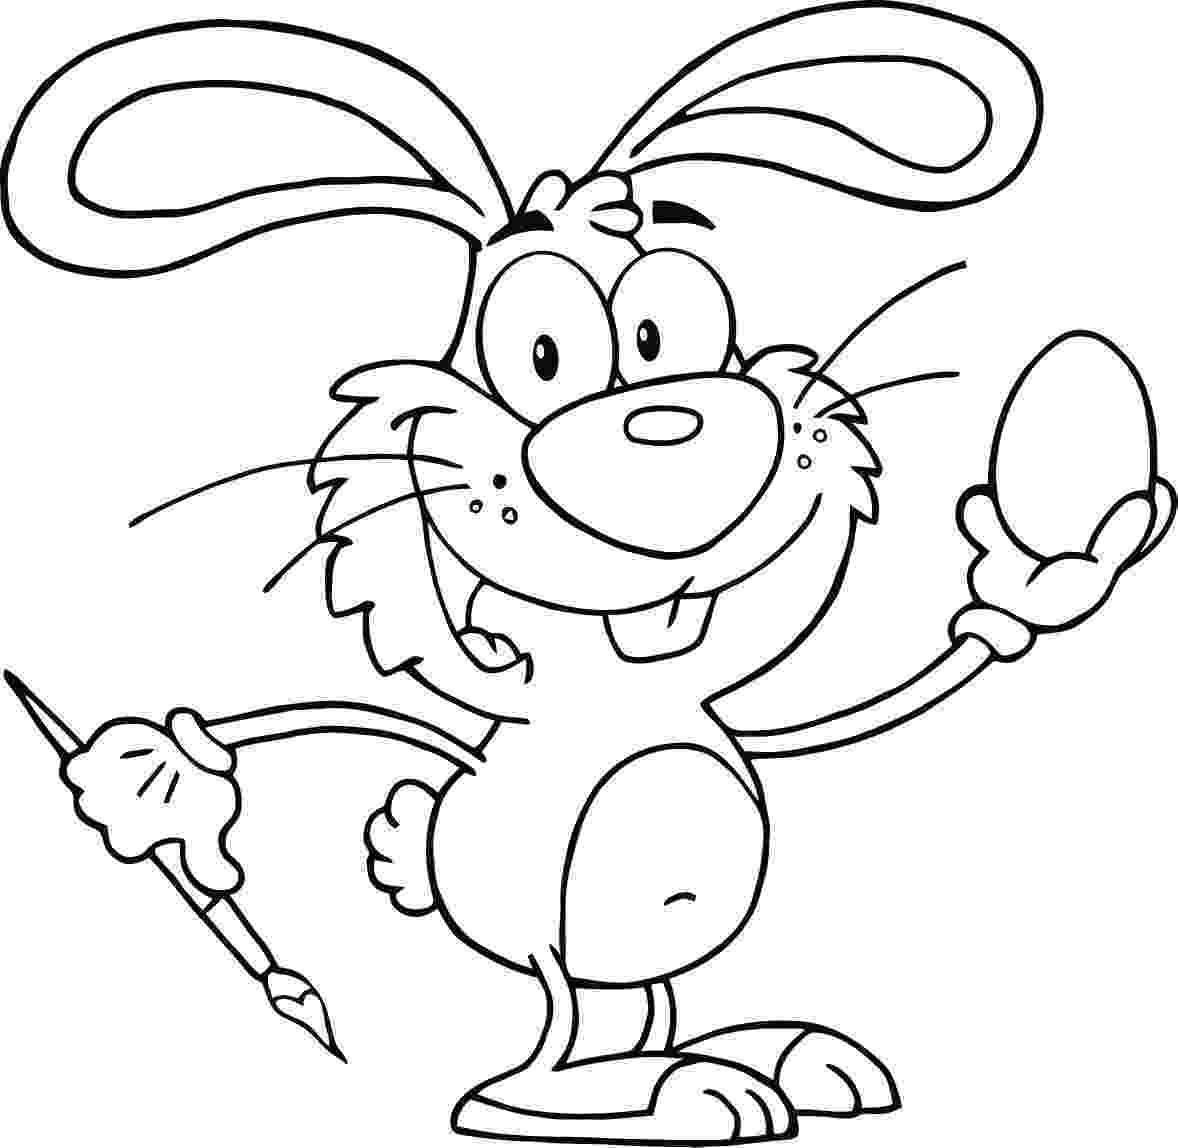 bunny images to color cartoon bunny coloring page free printable coloring pages to color bunny images 